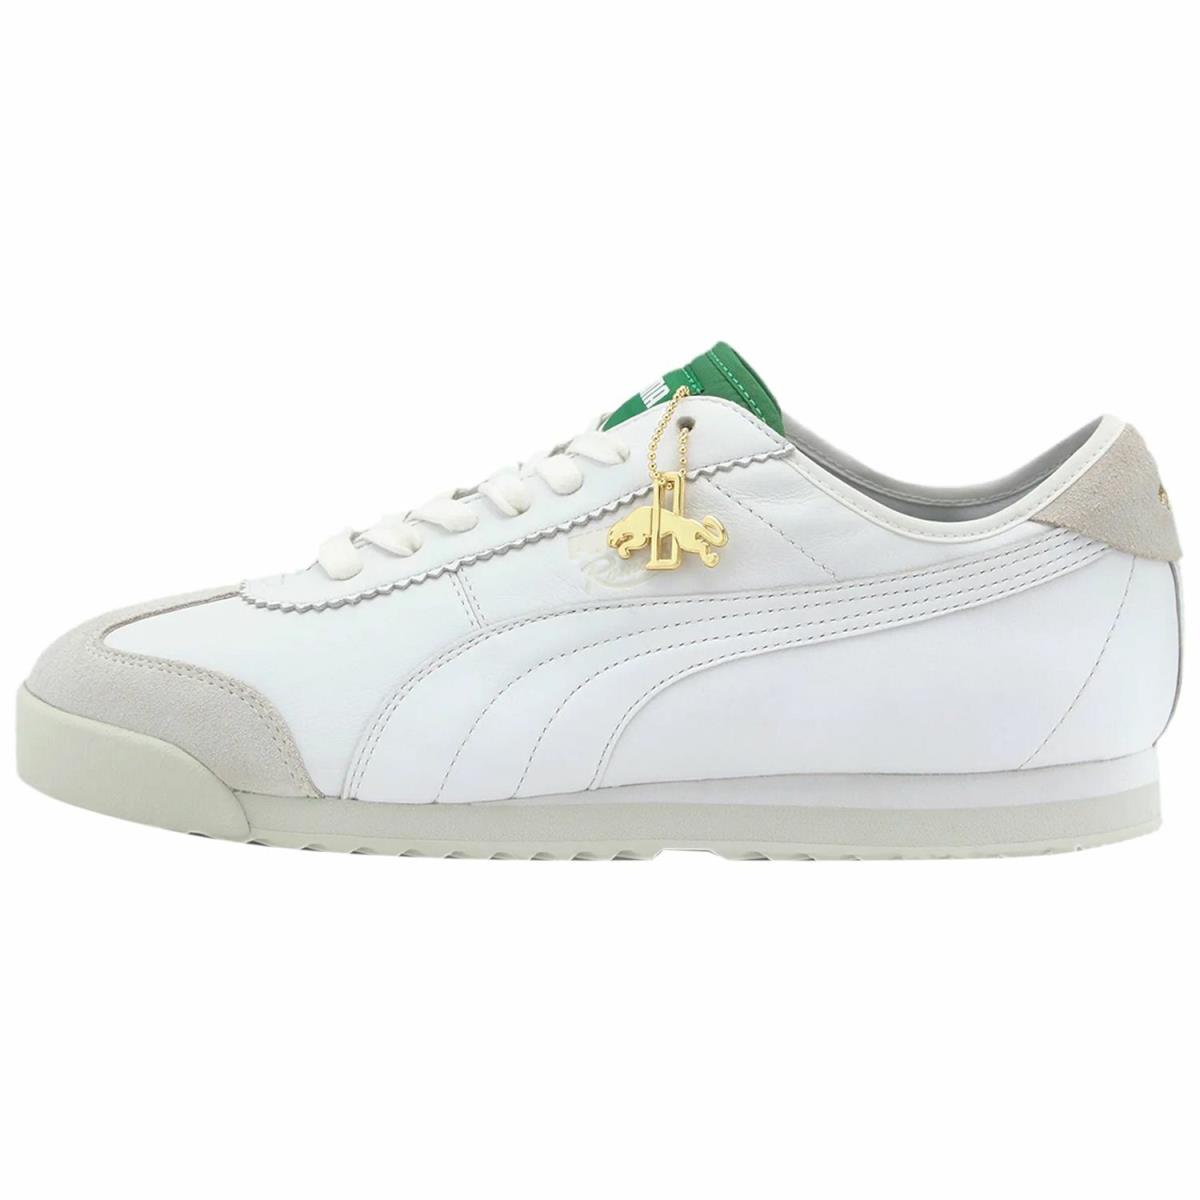 Puma Roma `68 Dassler Legacy Collection Mens 374881-01 White Shoes Size 9